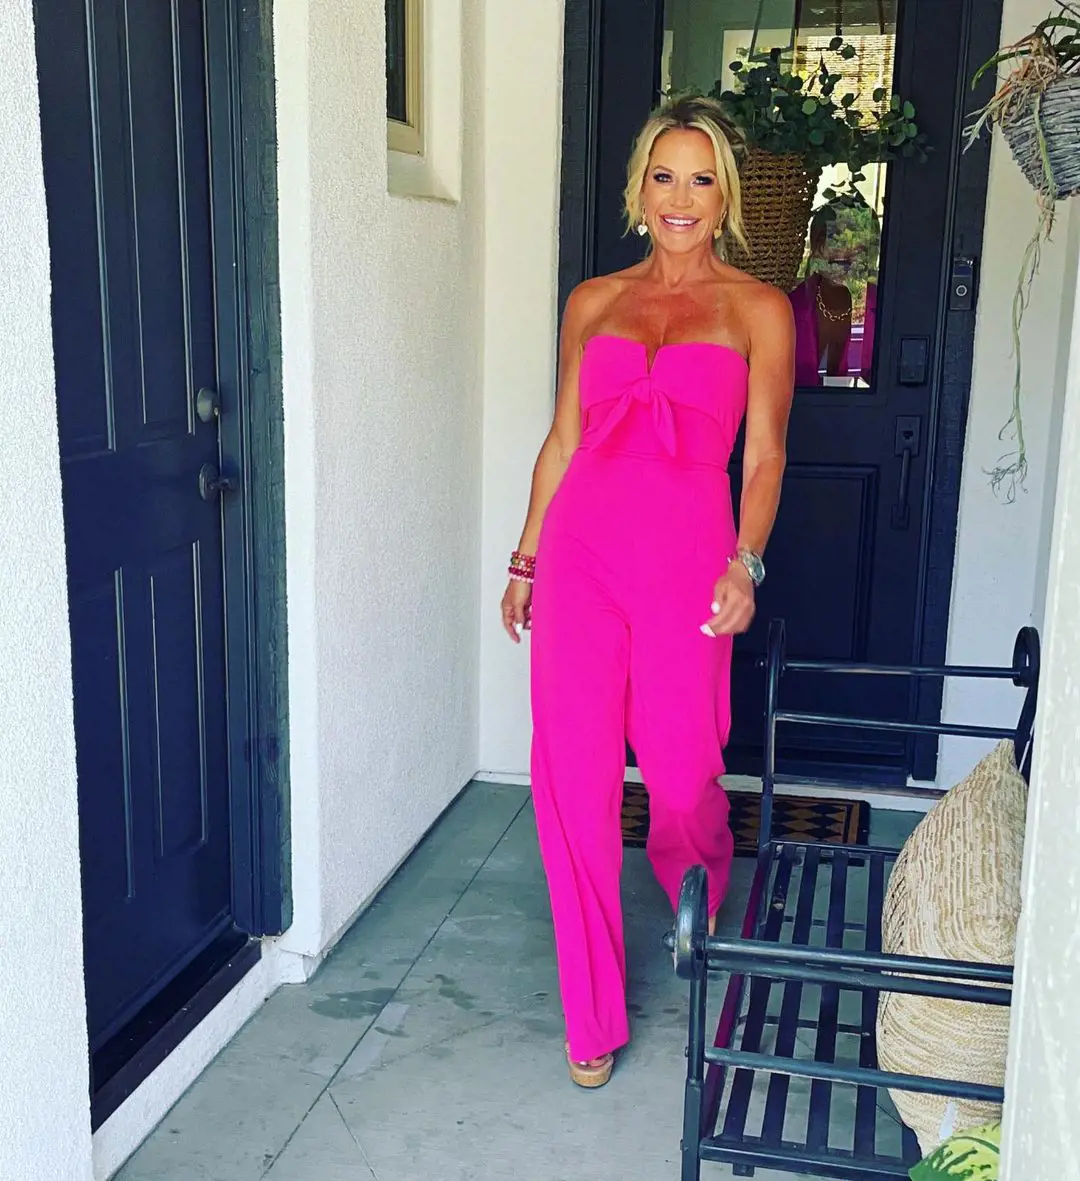 Jennifer Pedranti is a new cast member of The Real Housewives of Orange County (RHOC) Season 17, which premiered on June 7